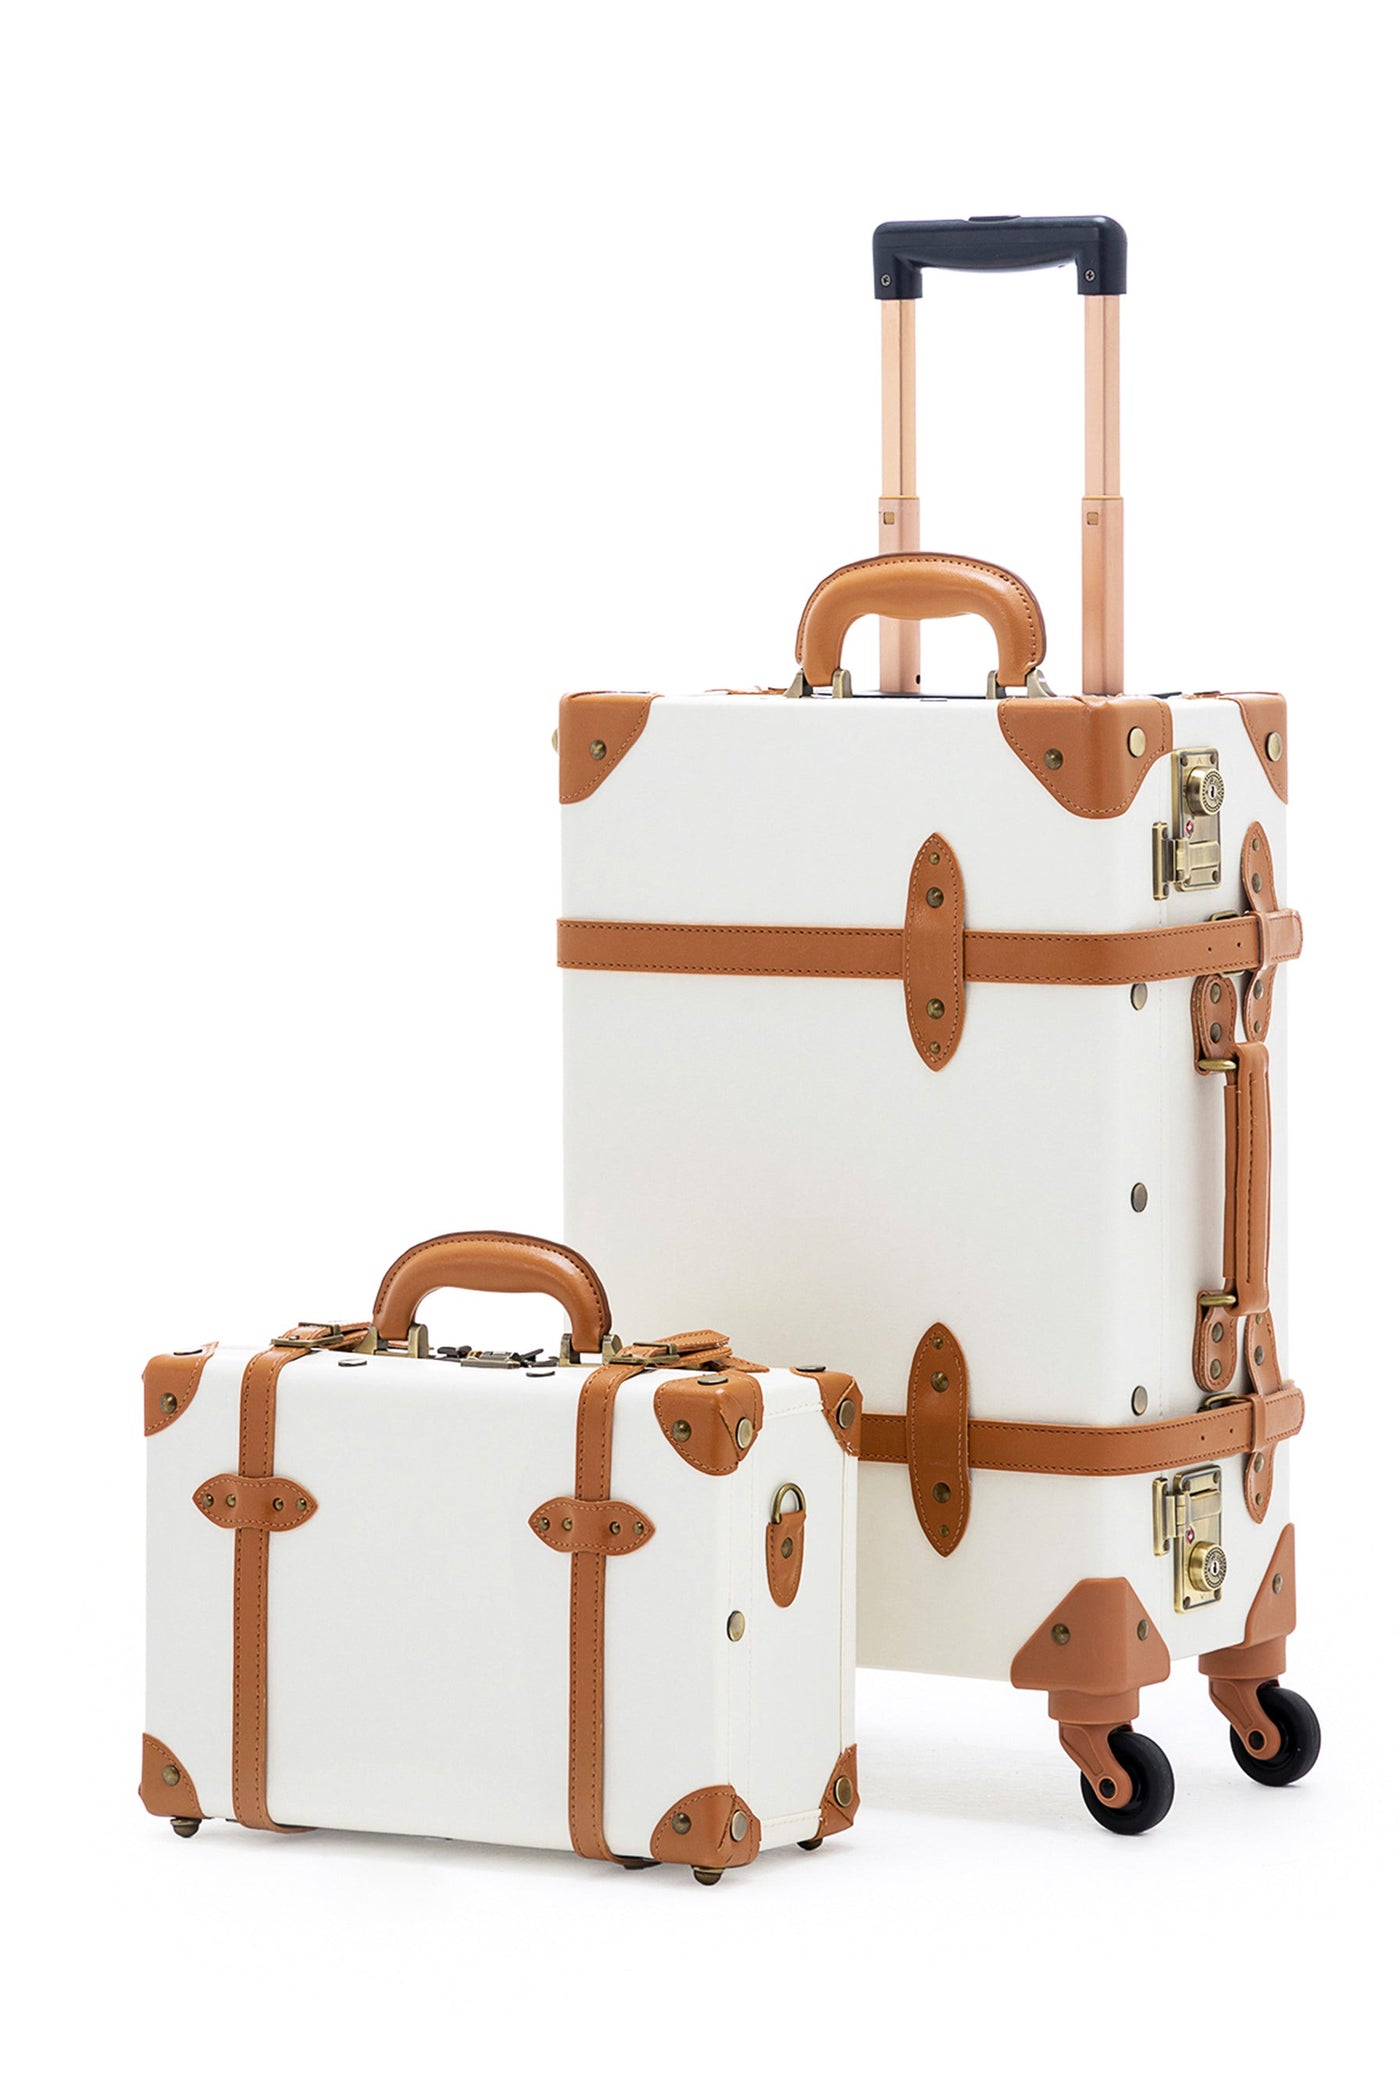 COTRUNKAGE Minimalist 2 Piece Vintage Luggage Sets Travel Carry on Suitcase for Women with Spinner Wheels, Pearl White